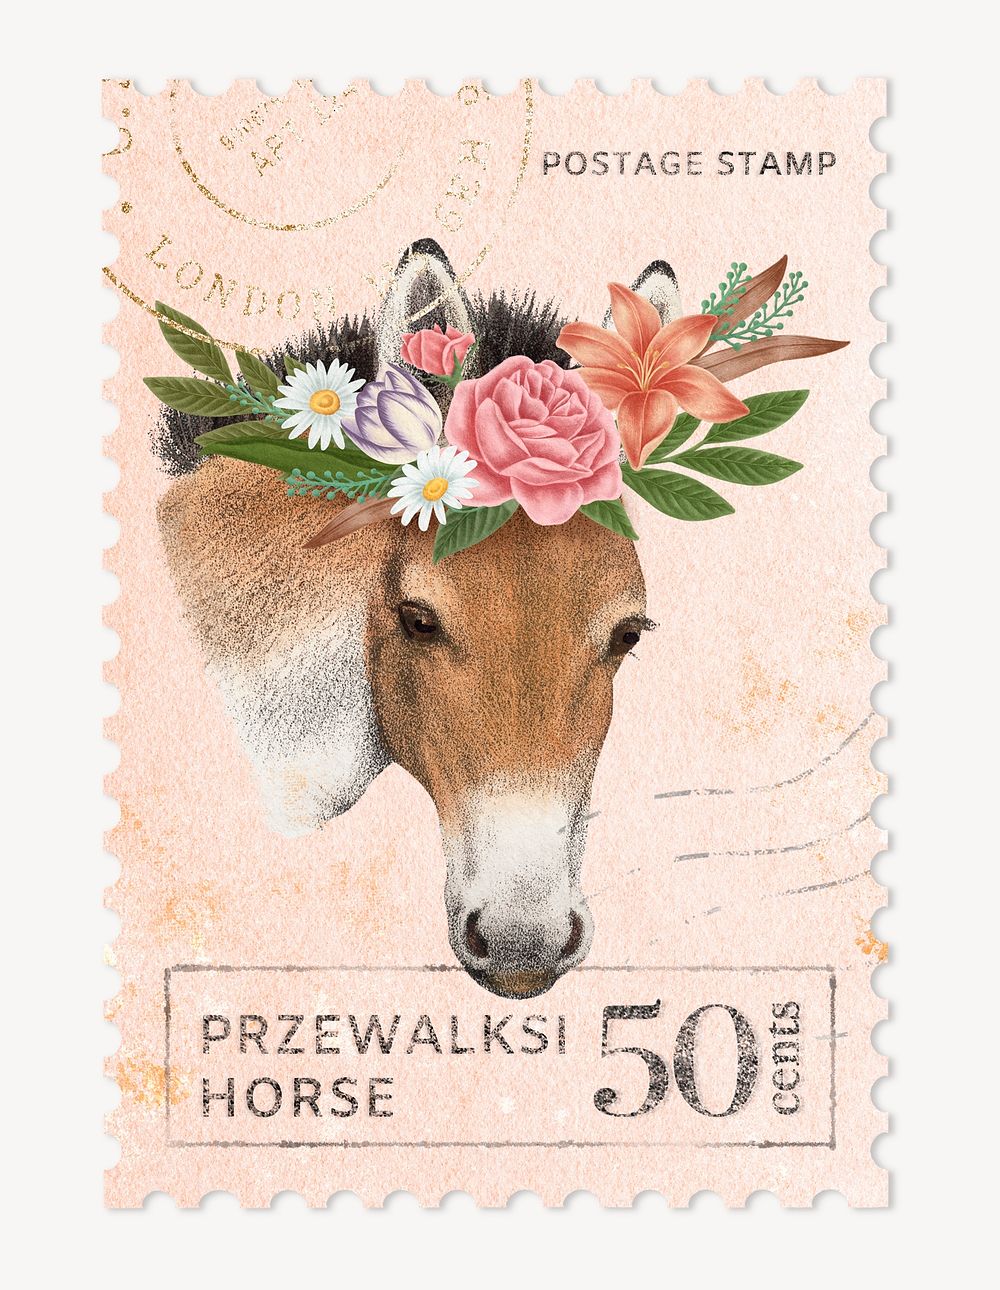 Vintage horse postage stamp, aesthetic animal graphic